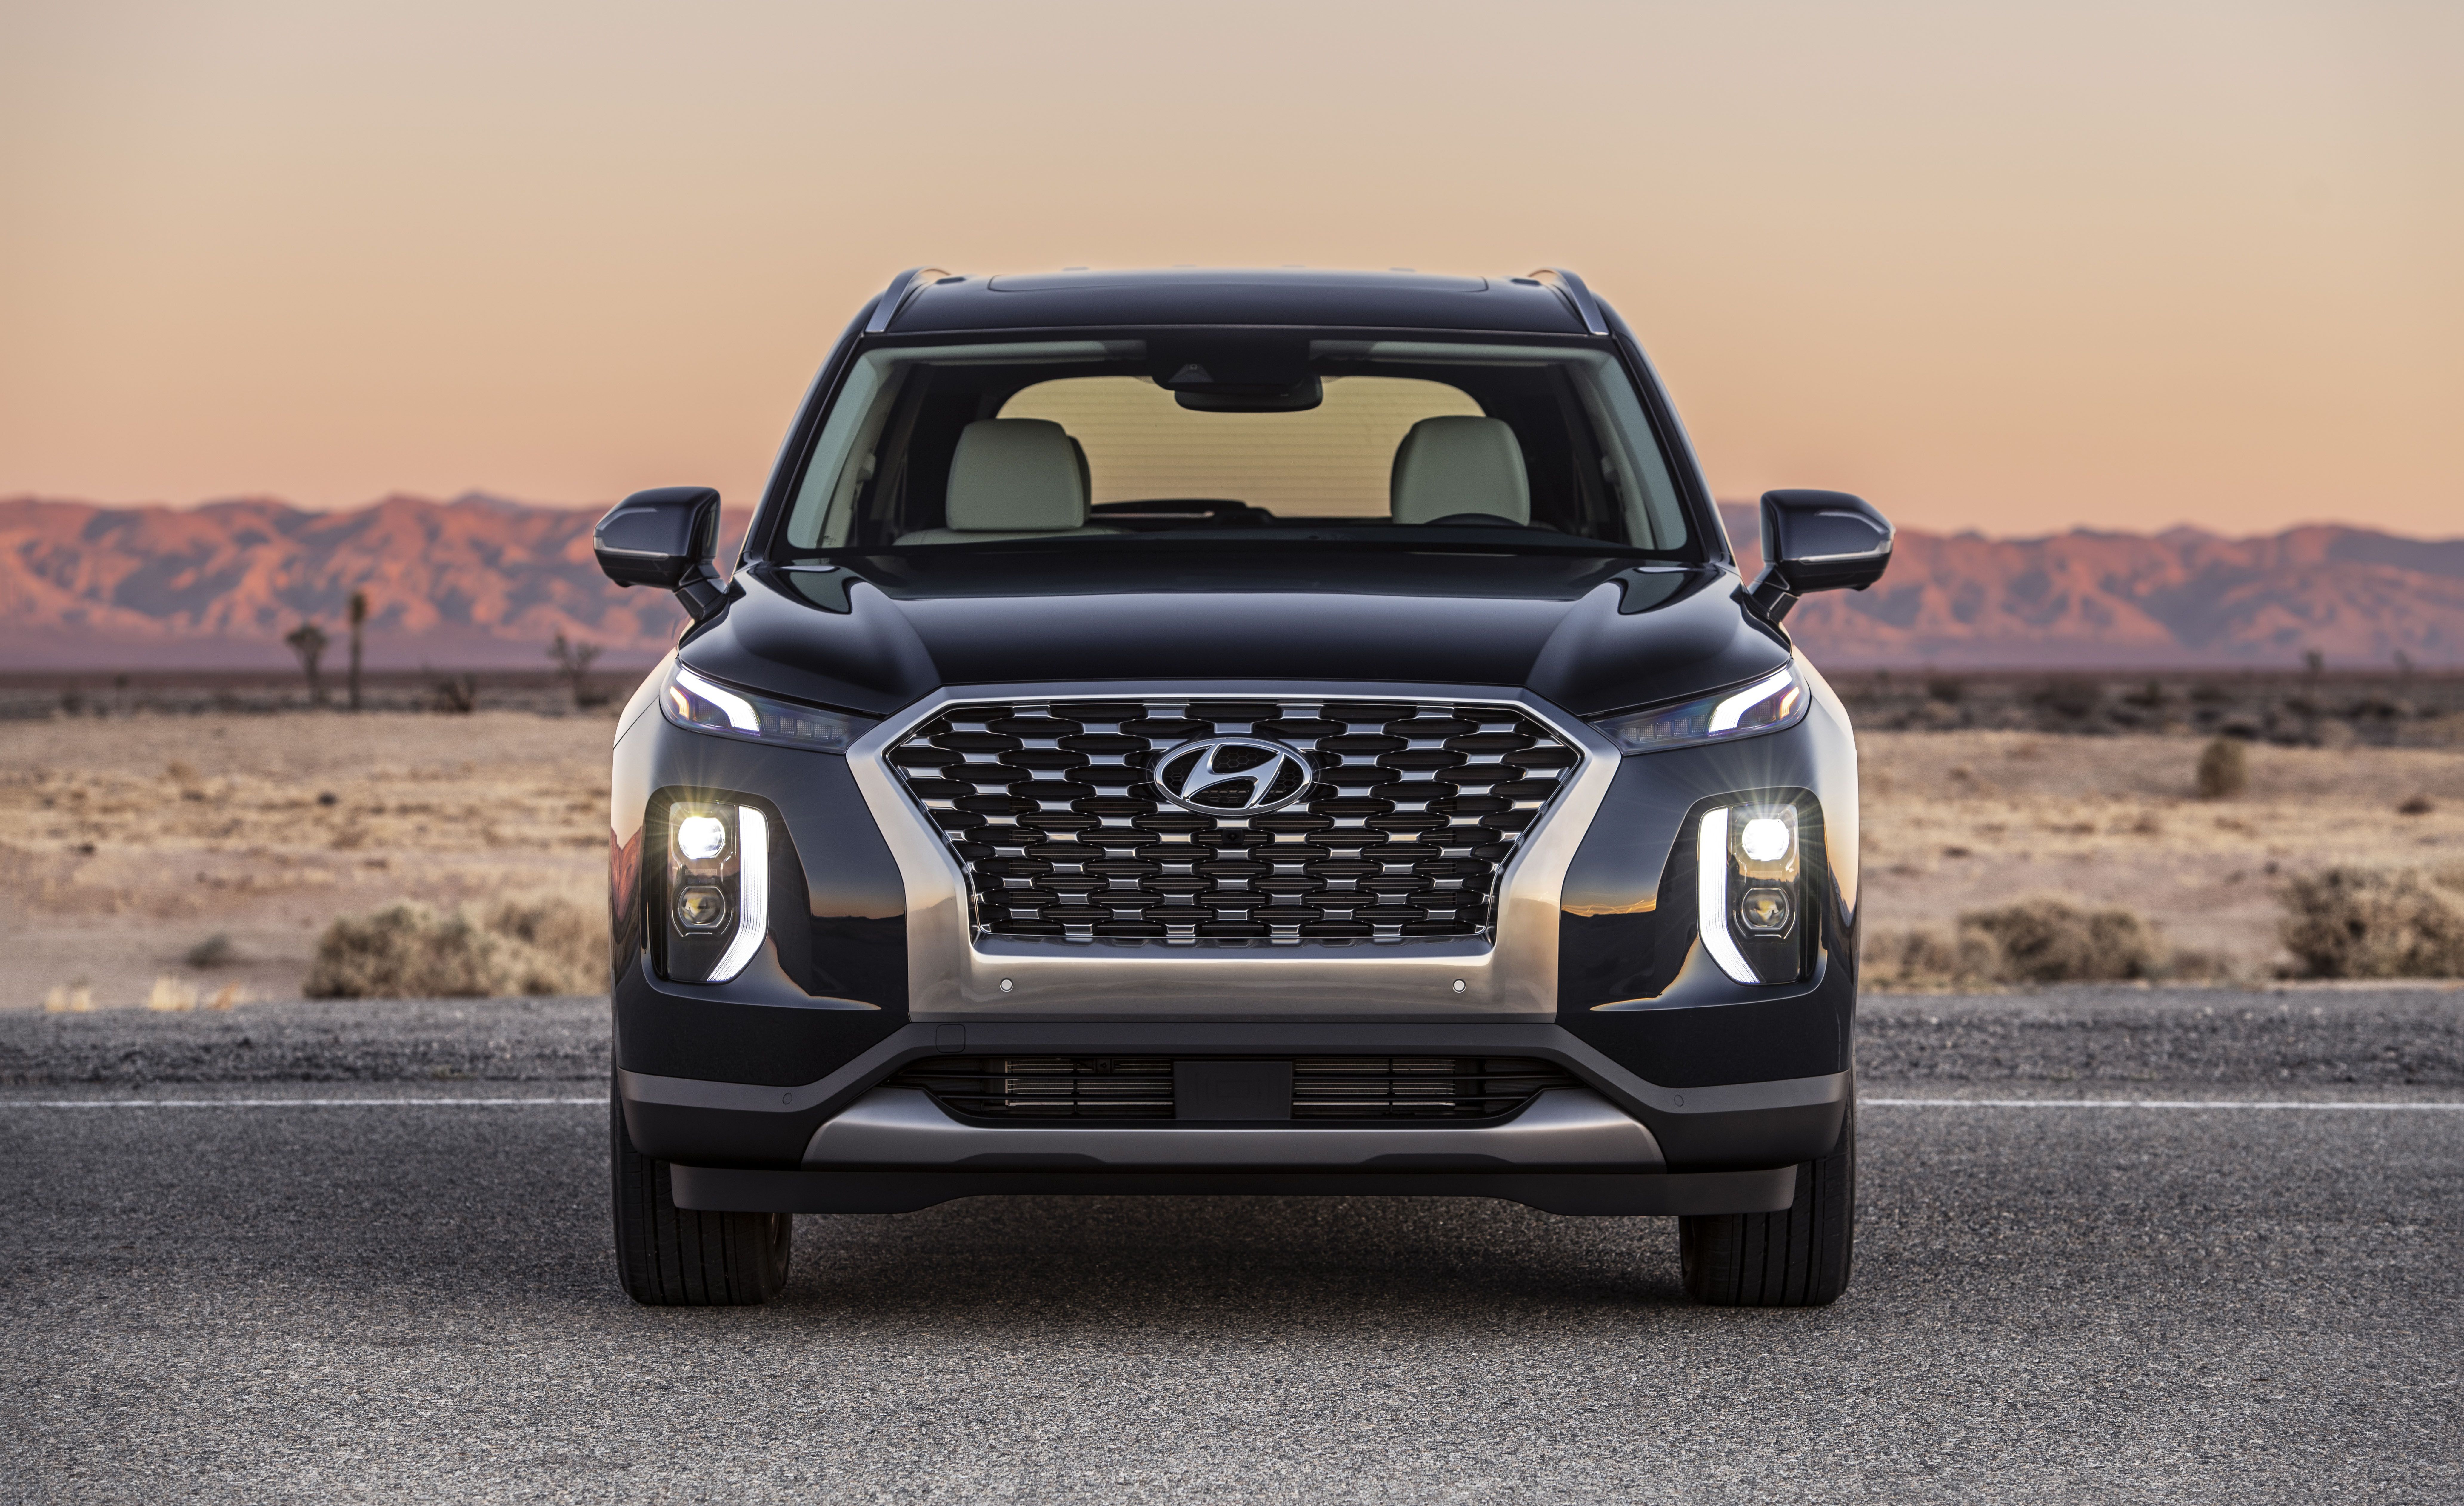 Comments On How We D Spec It The 2020 Hyundai Palisade With